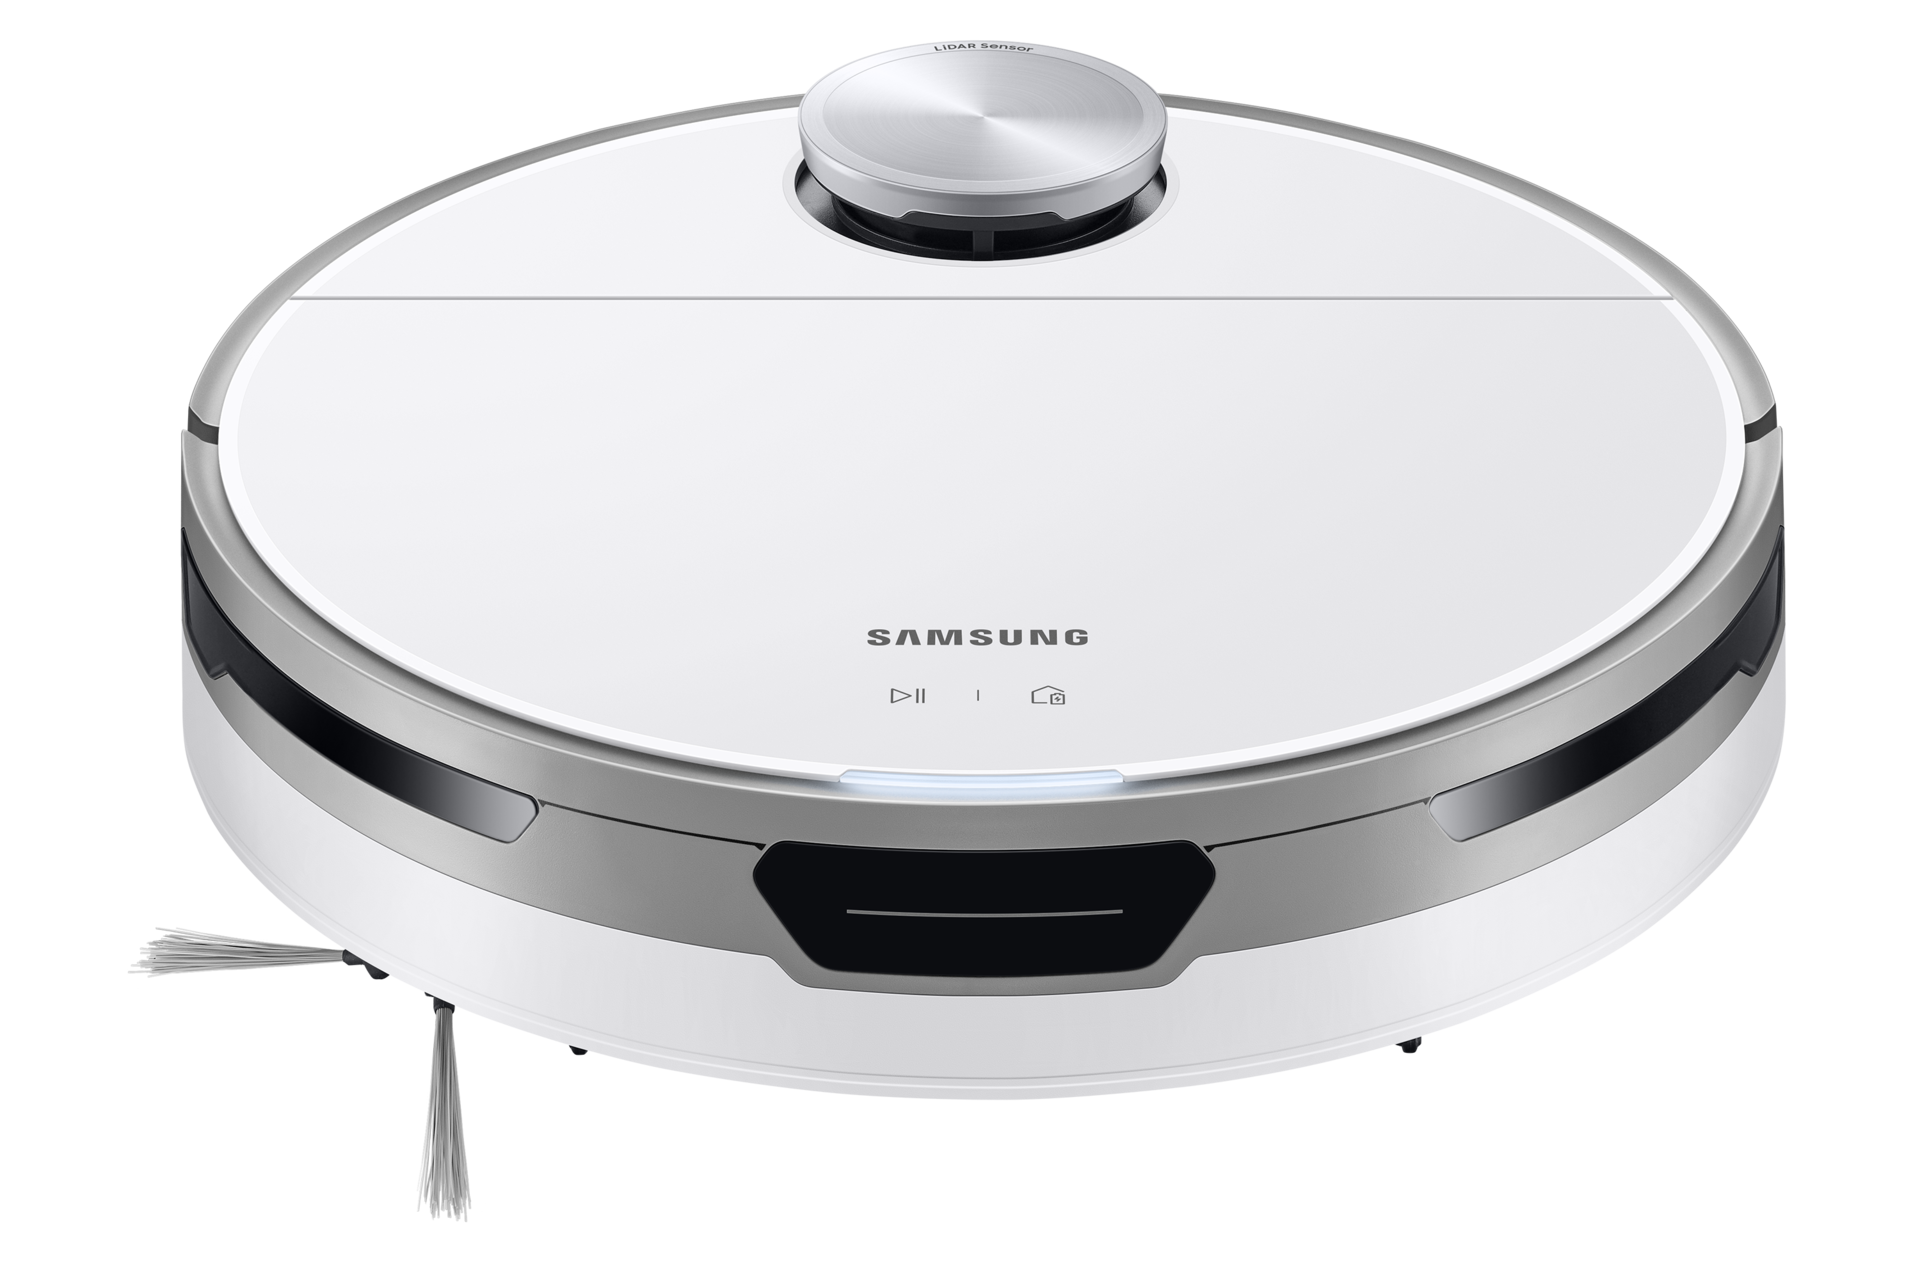 Buy the Samsung Jet Bot robot vacuum cleaner in Misty White at the latest price in Singapore.